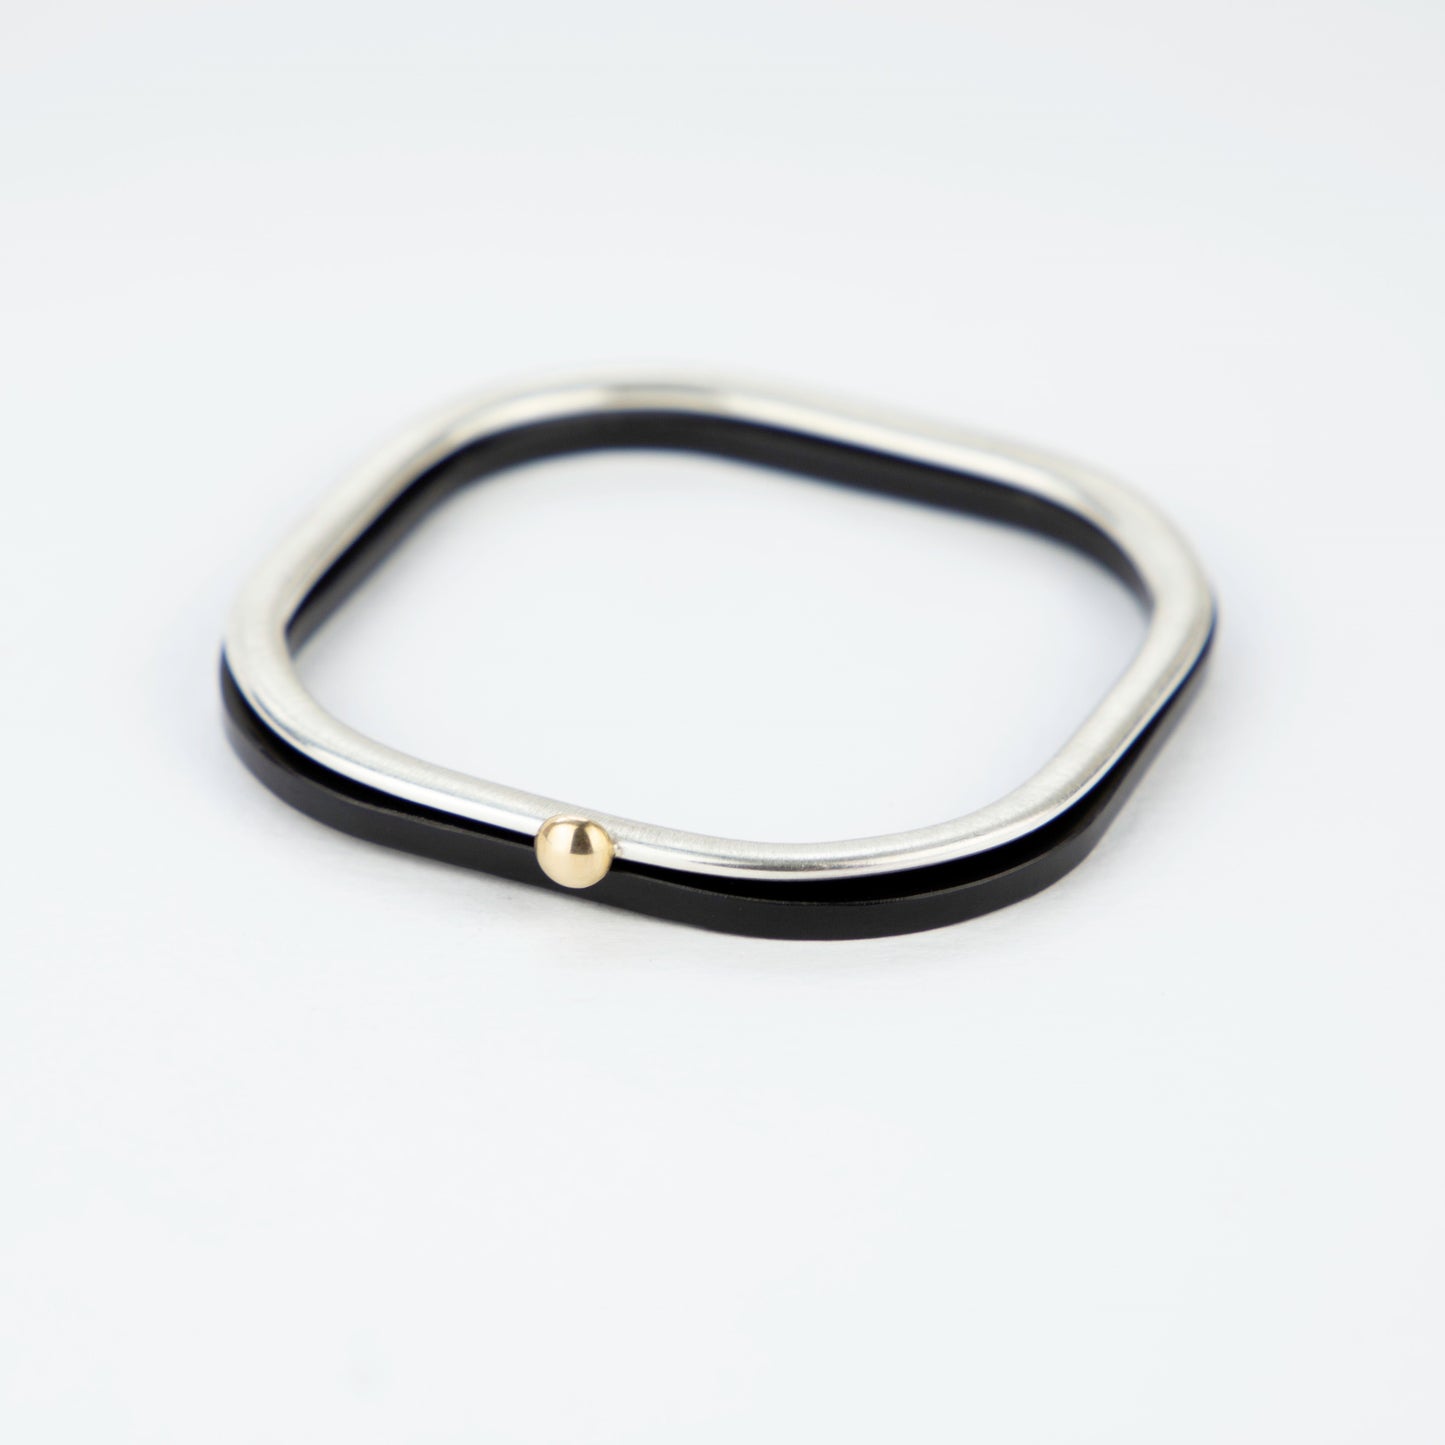 Square silver bangle with gold ball stacked with black acrylic bangle www.barbaraspence.co.uk